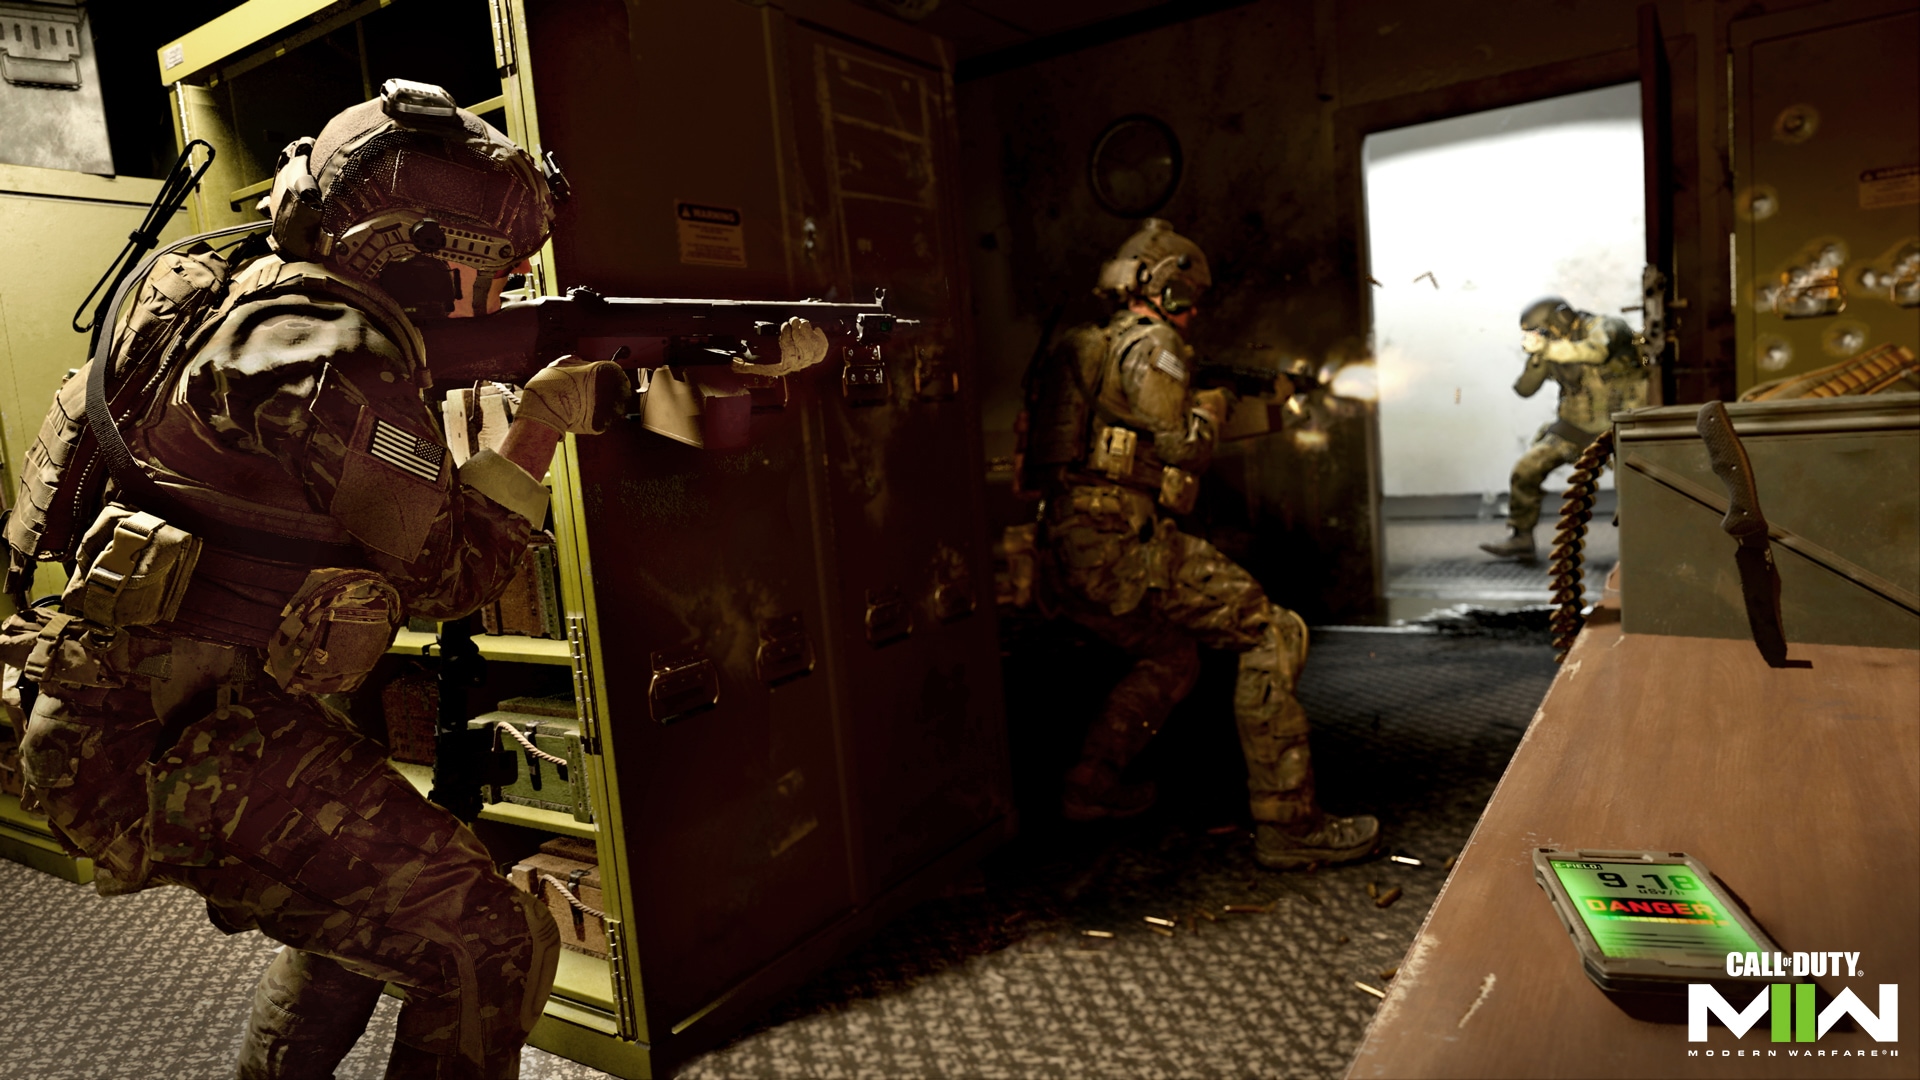 Call of Duty: Modern Warfare II Multiplayer Overview — Call of